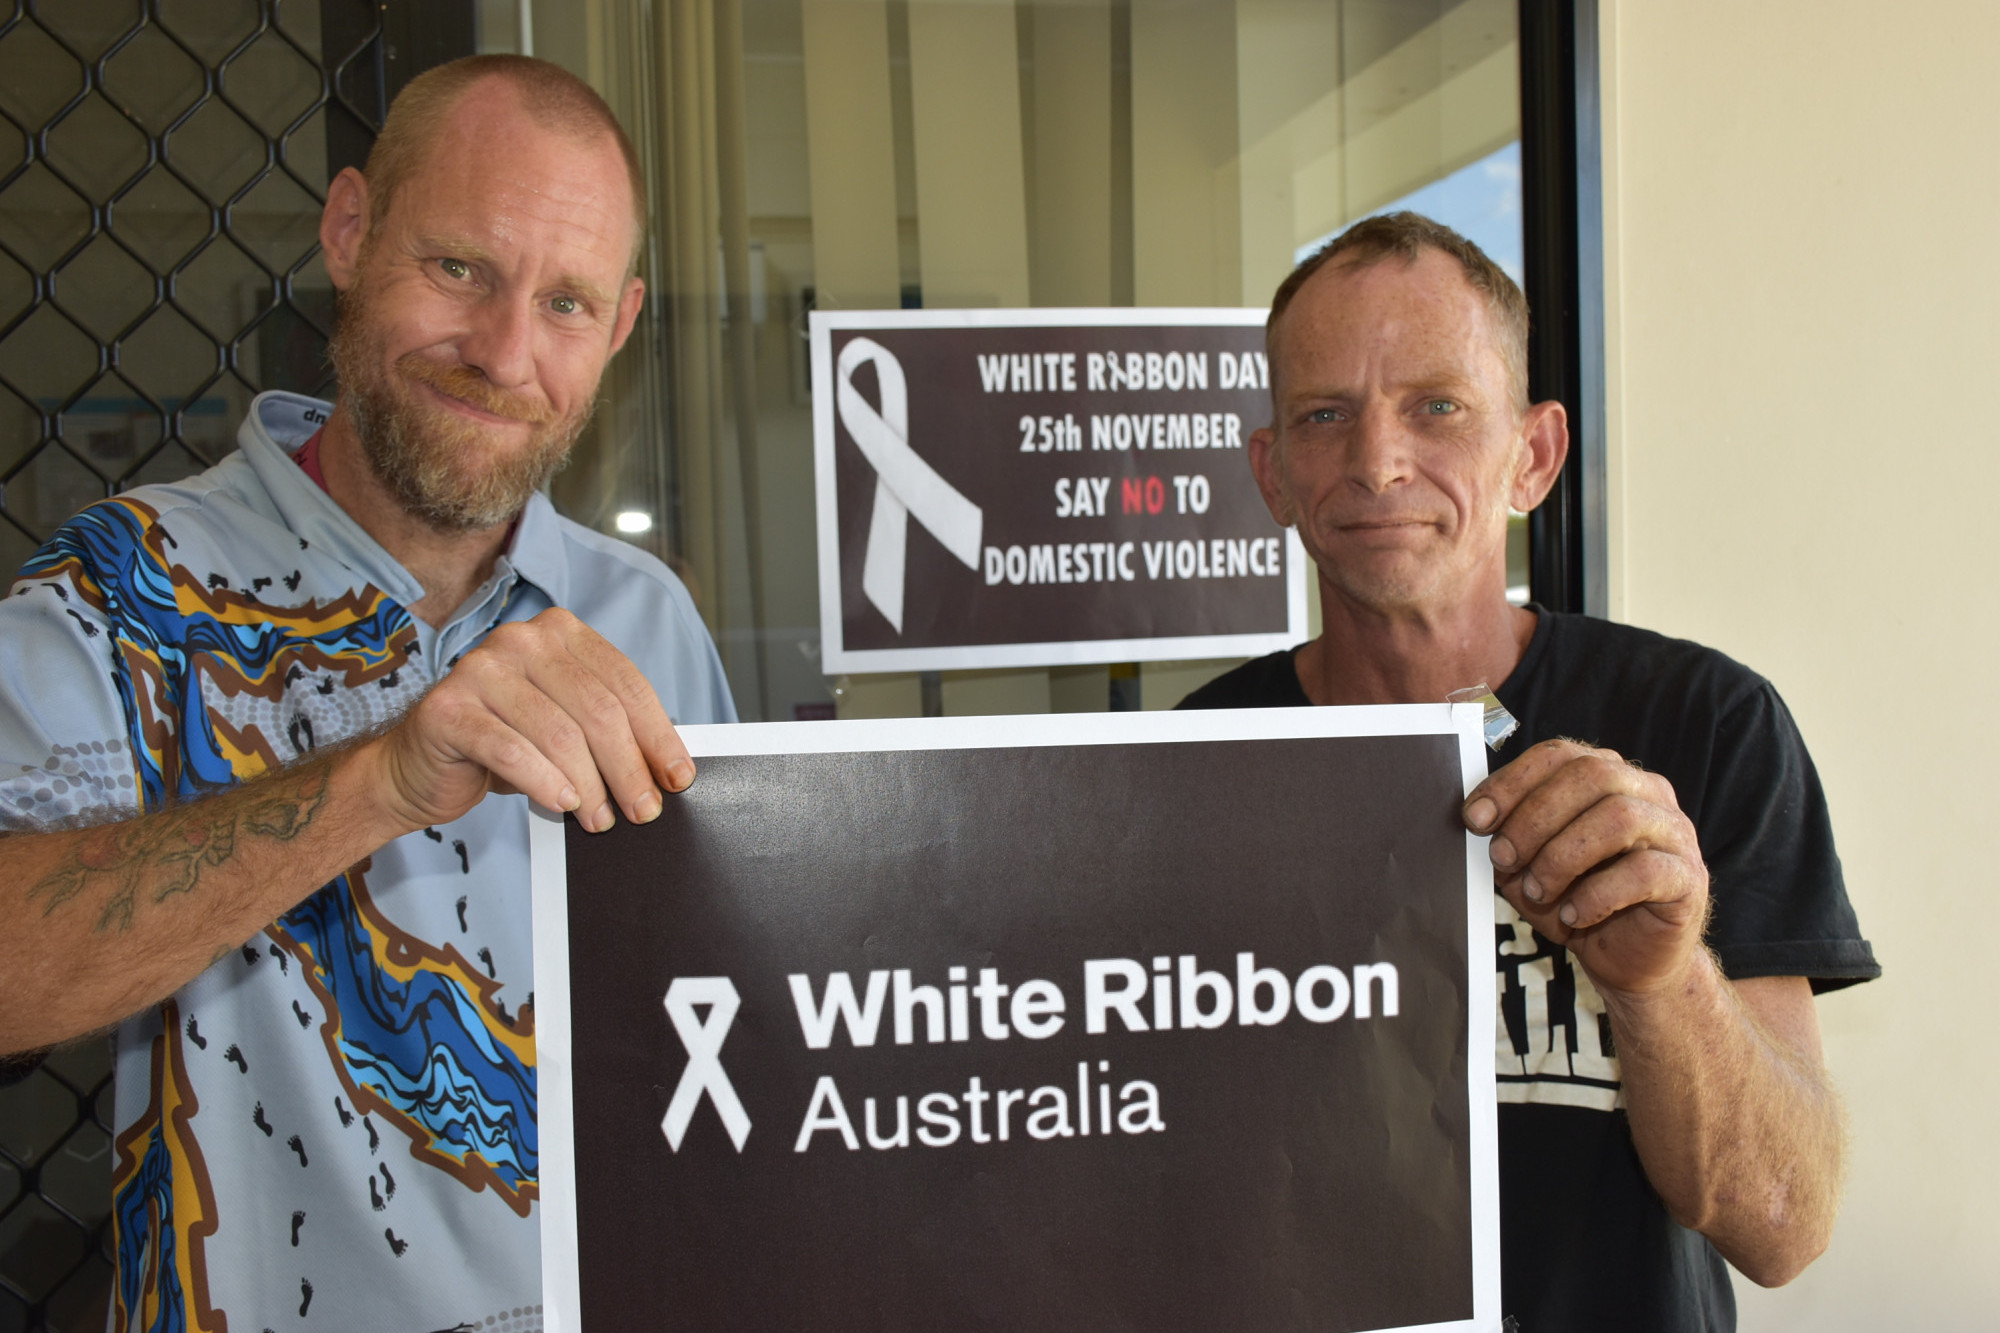 Jason Shaw and Richard Kissick are supporting White Ribbon Day and standing up against domestic and family violence